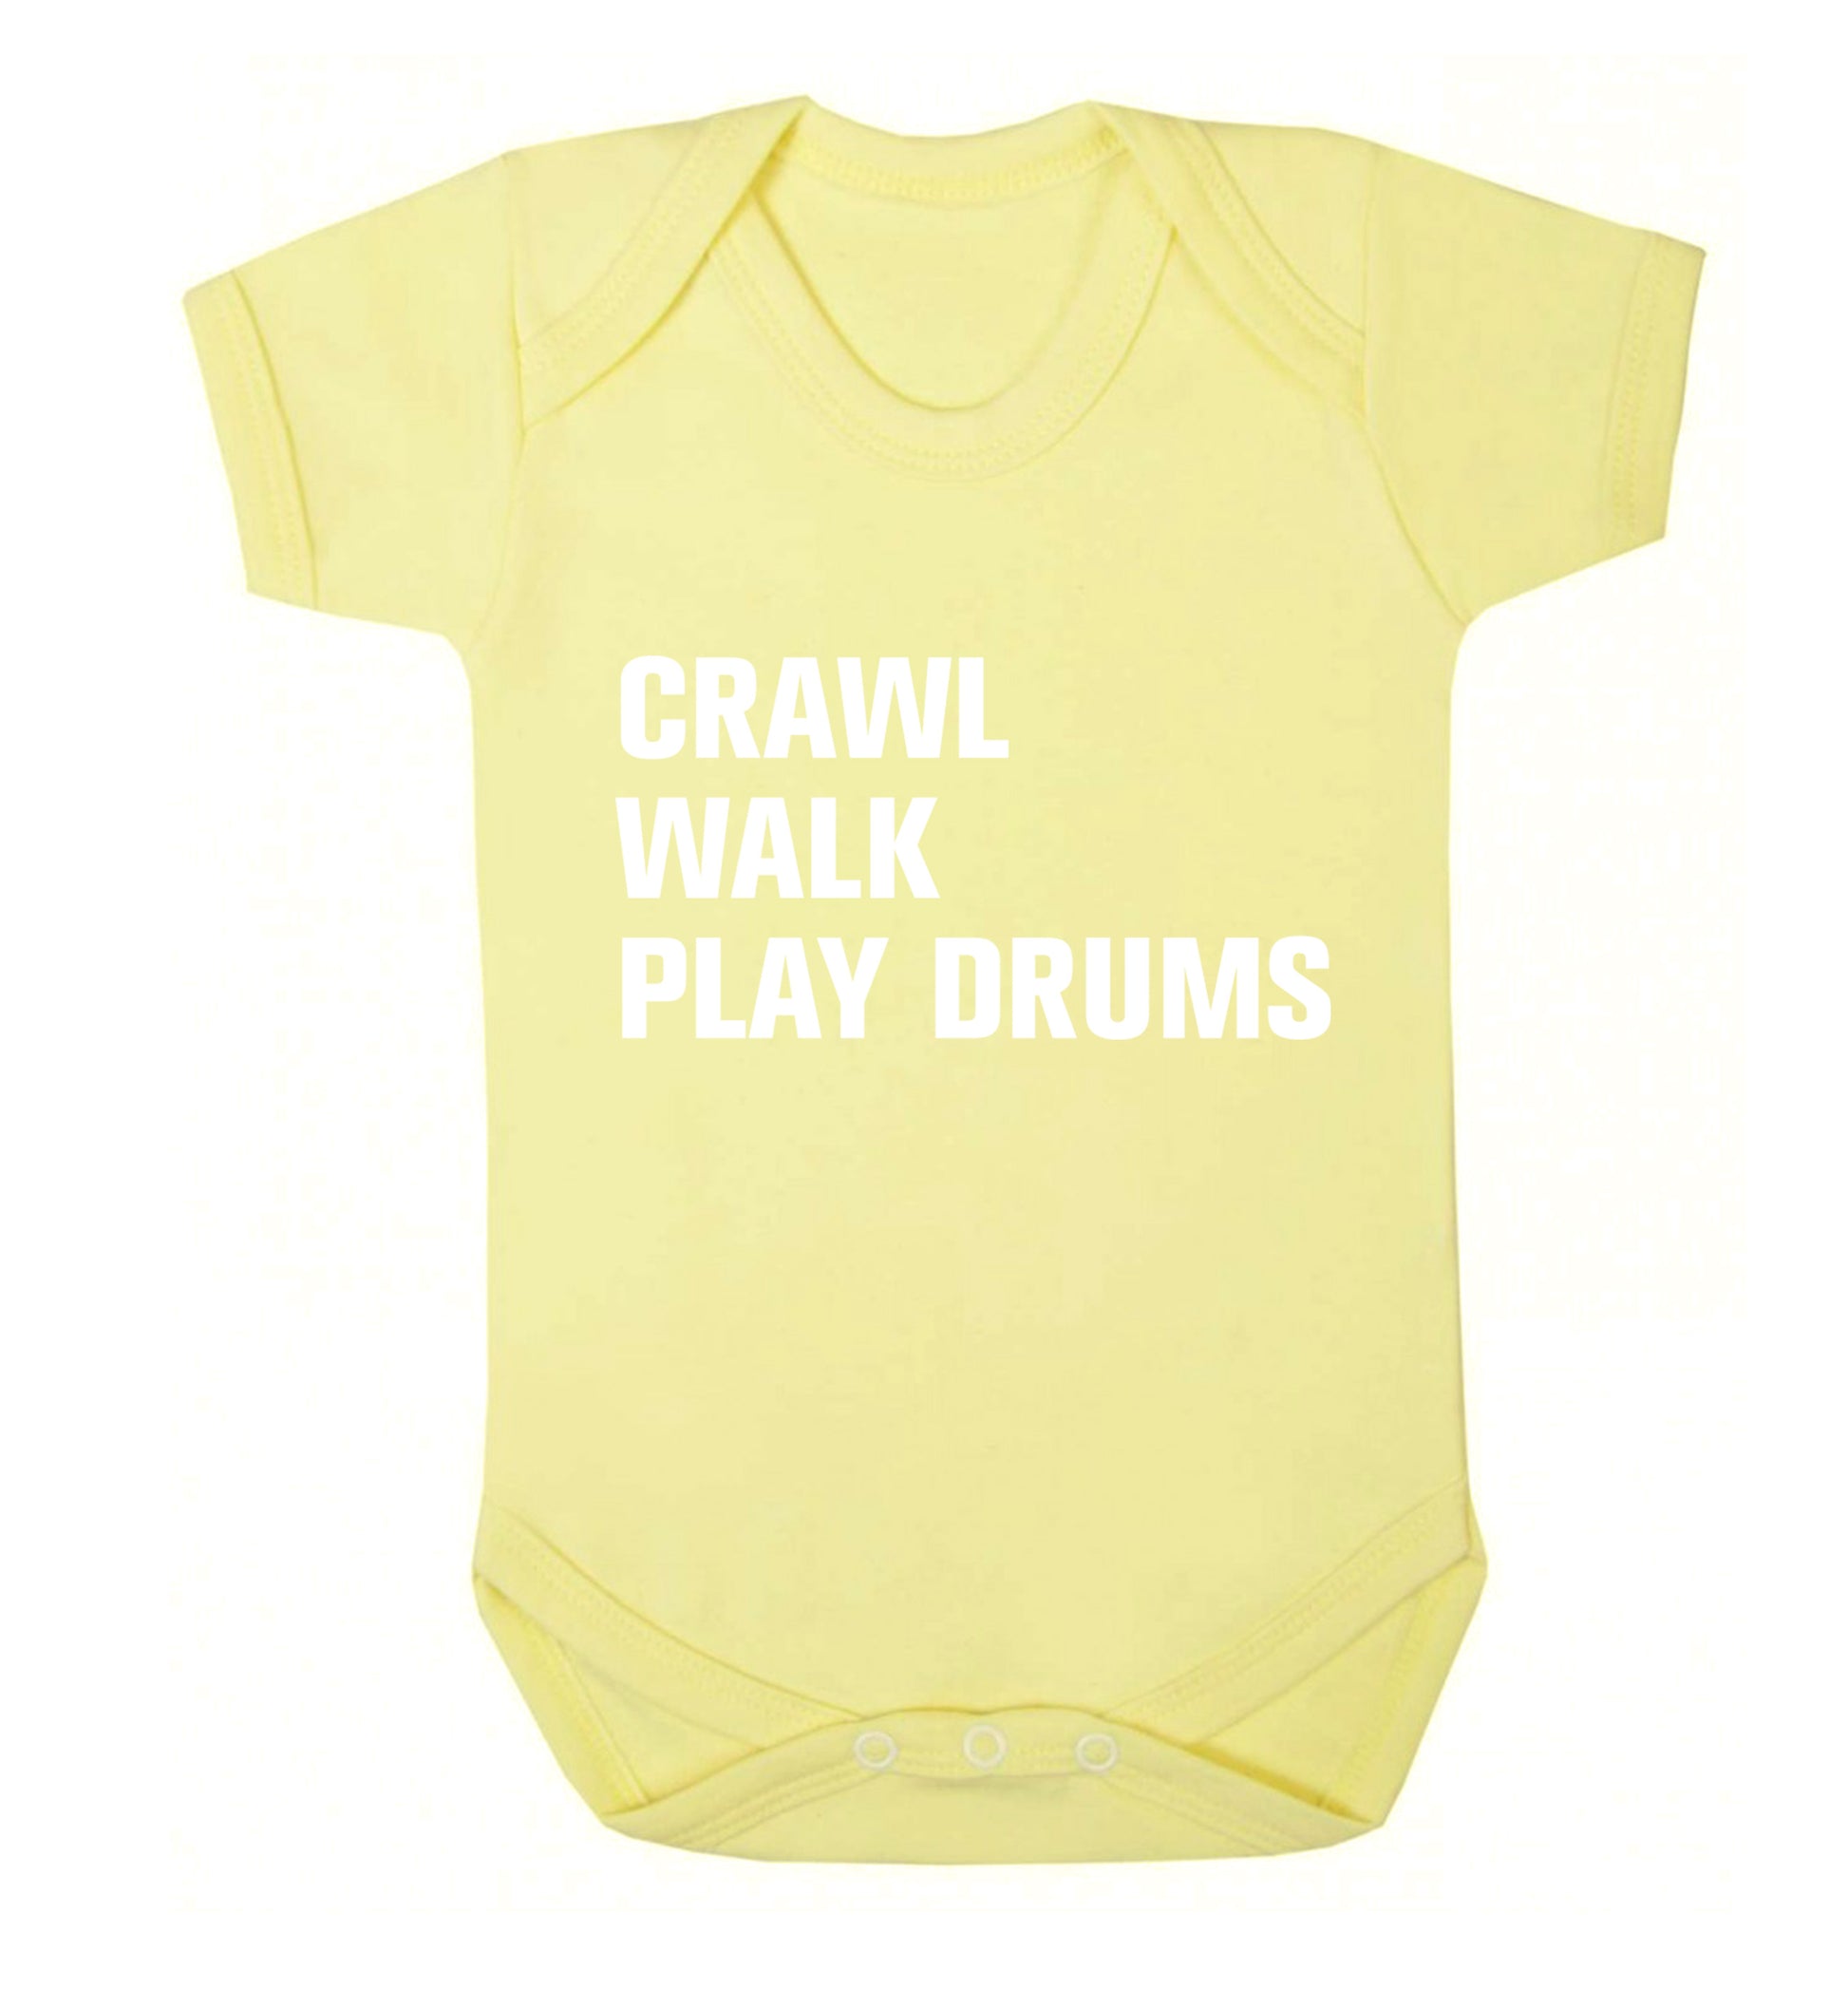 Crawl walk play drums Baby Vest pale yellow 18-24 months